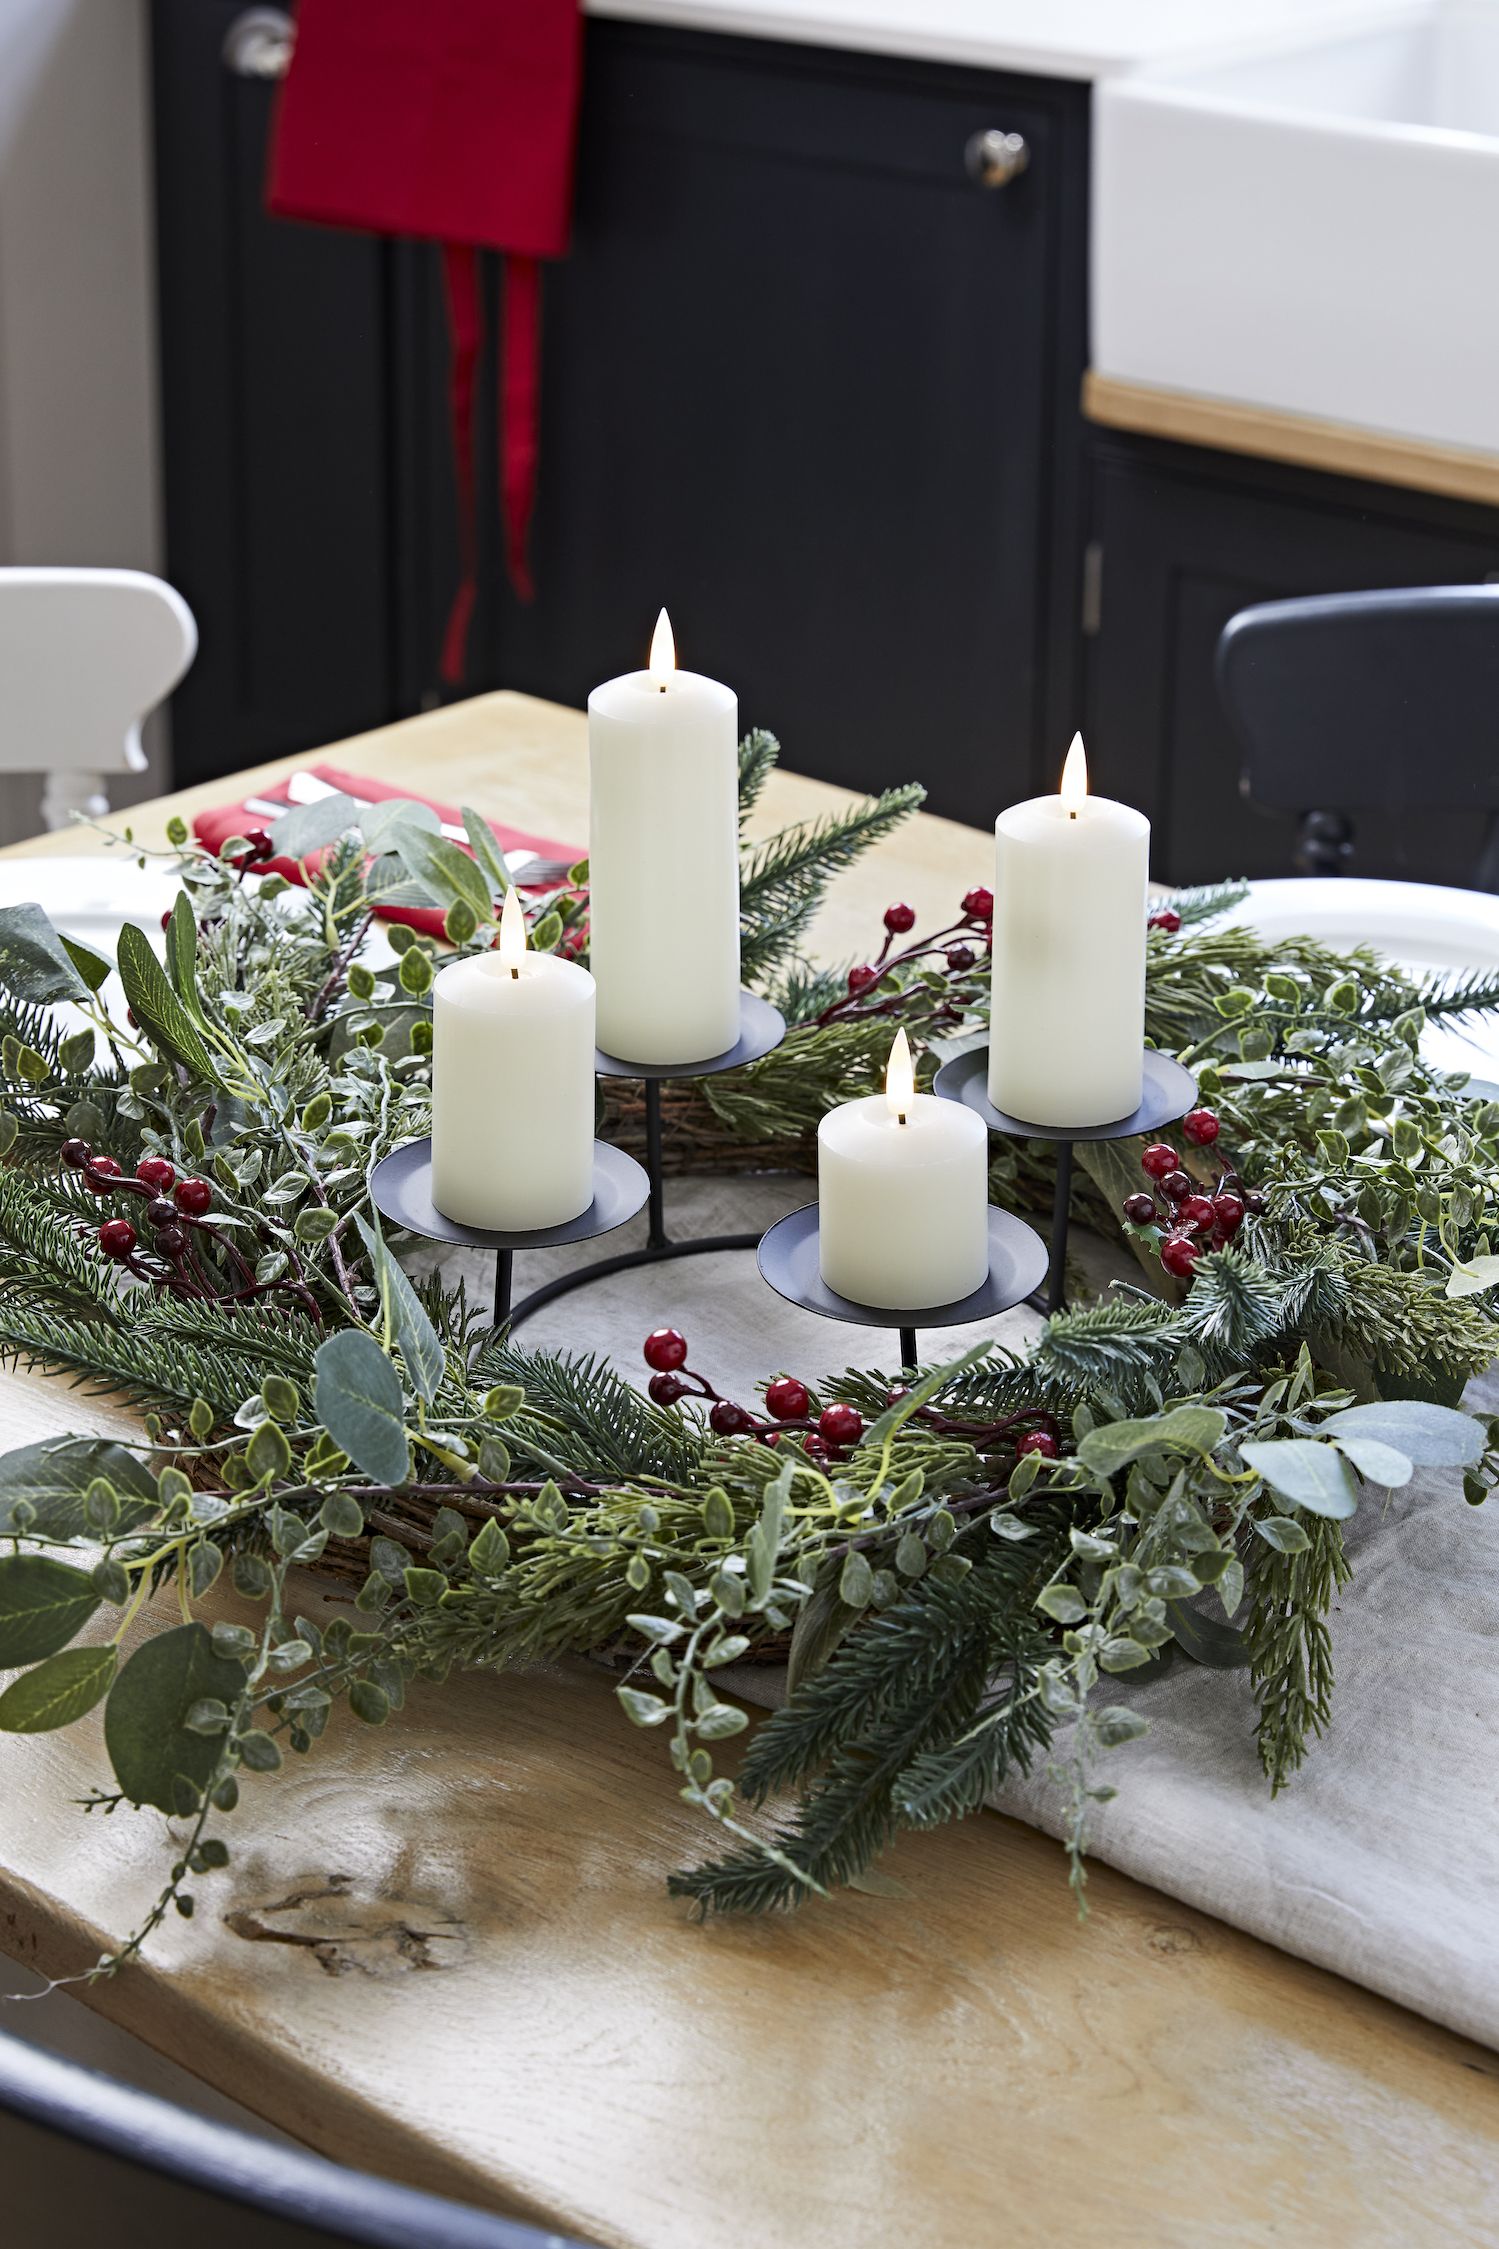 7 beautiful advent wreaths to buy in time for Christmas